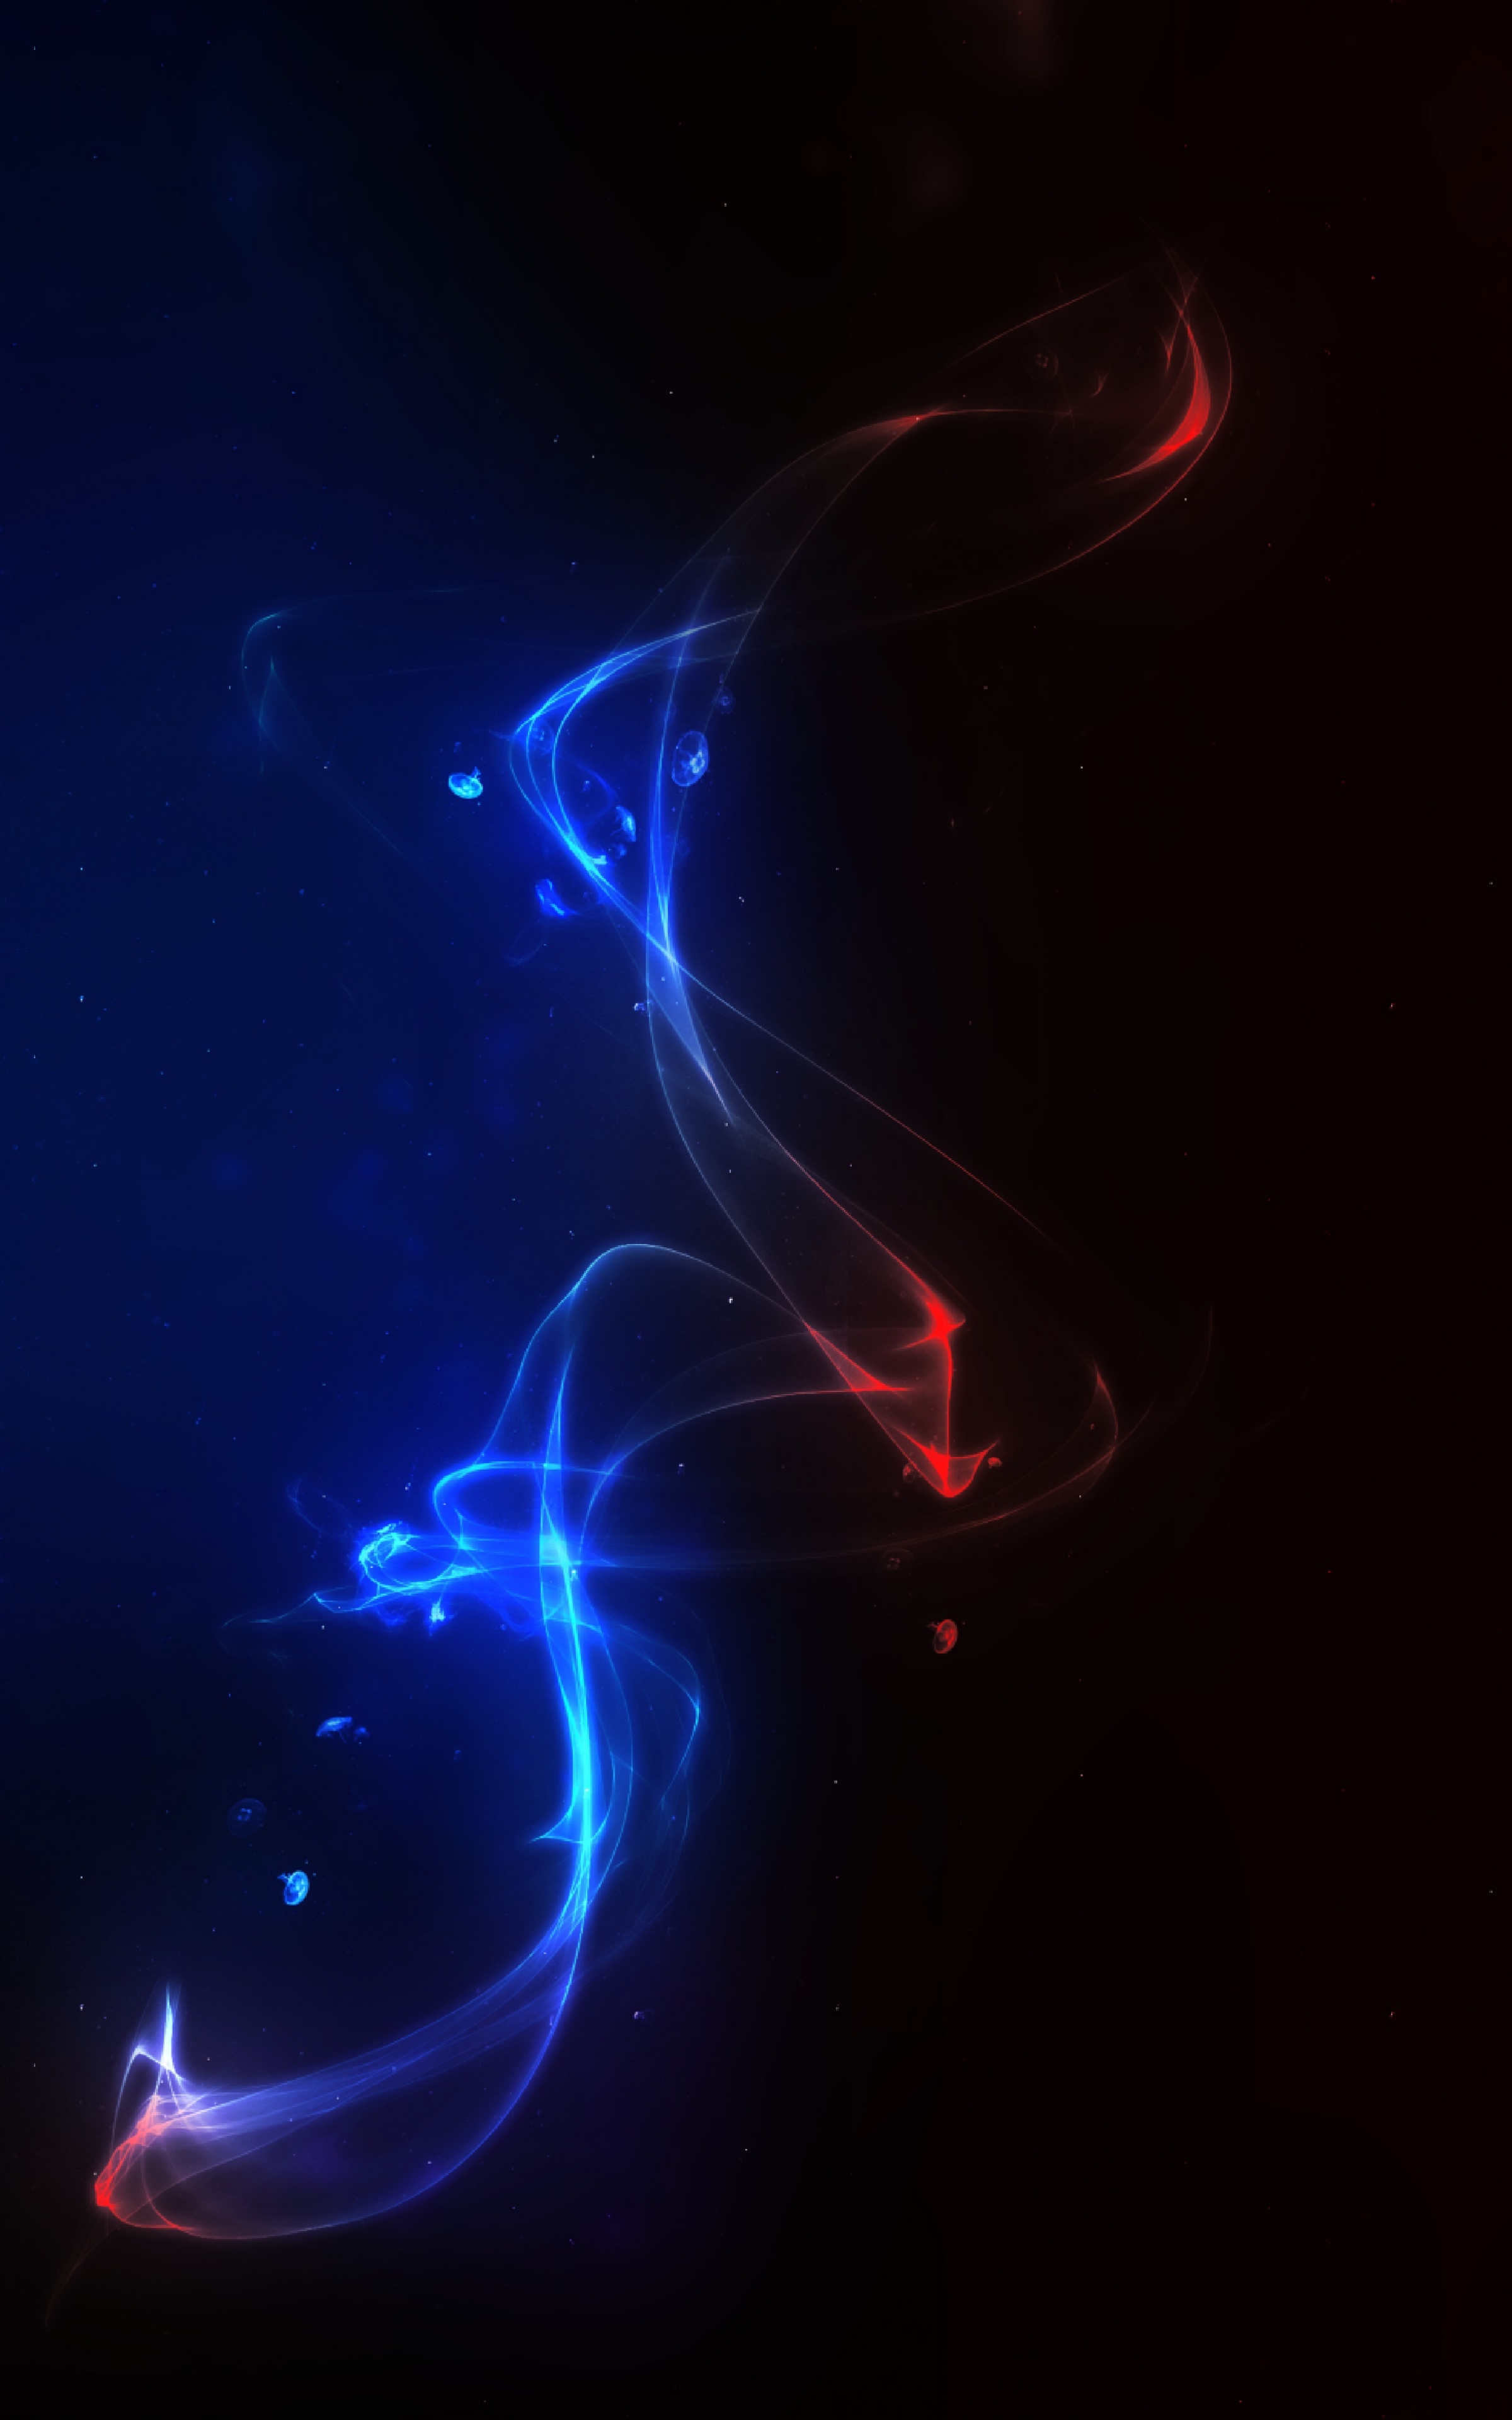 desktop Images glow, energy, abstract, blue, red